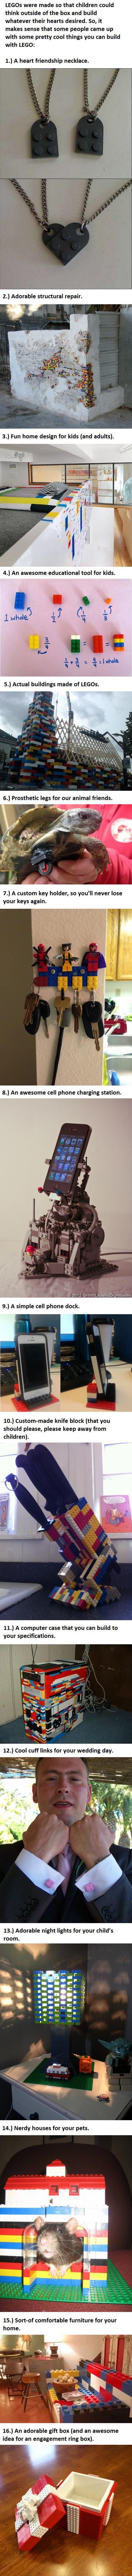 16 Awesome Uses for LEGO